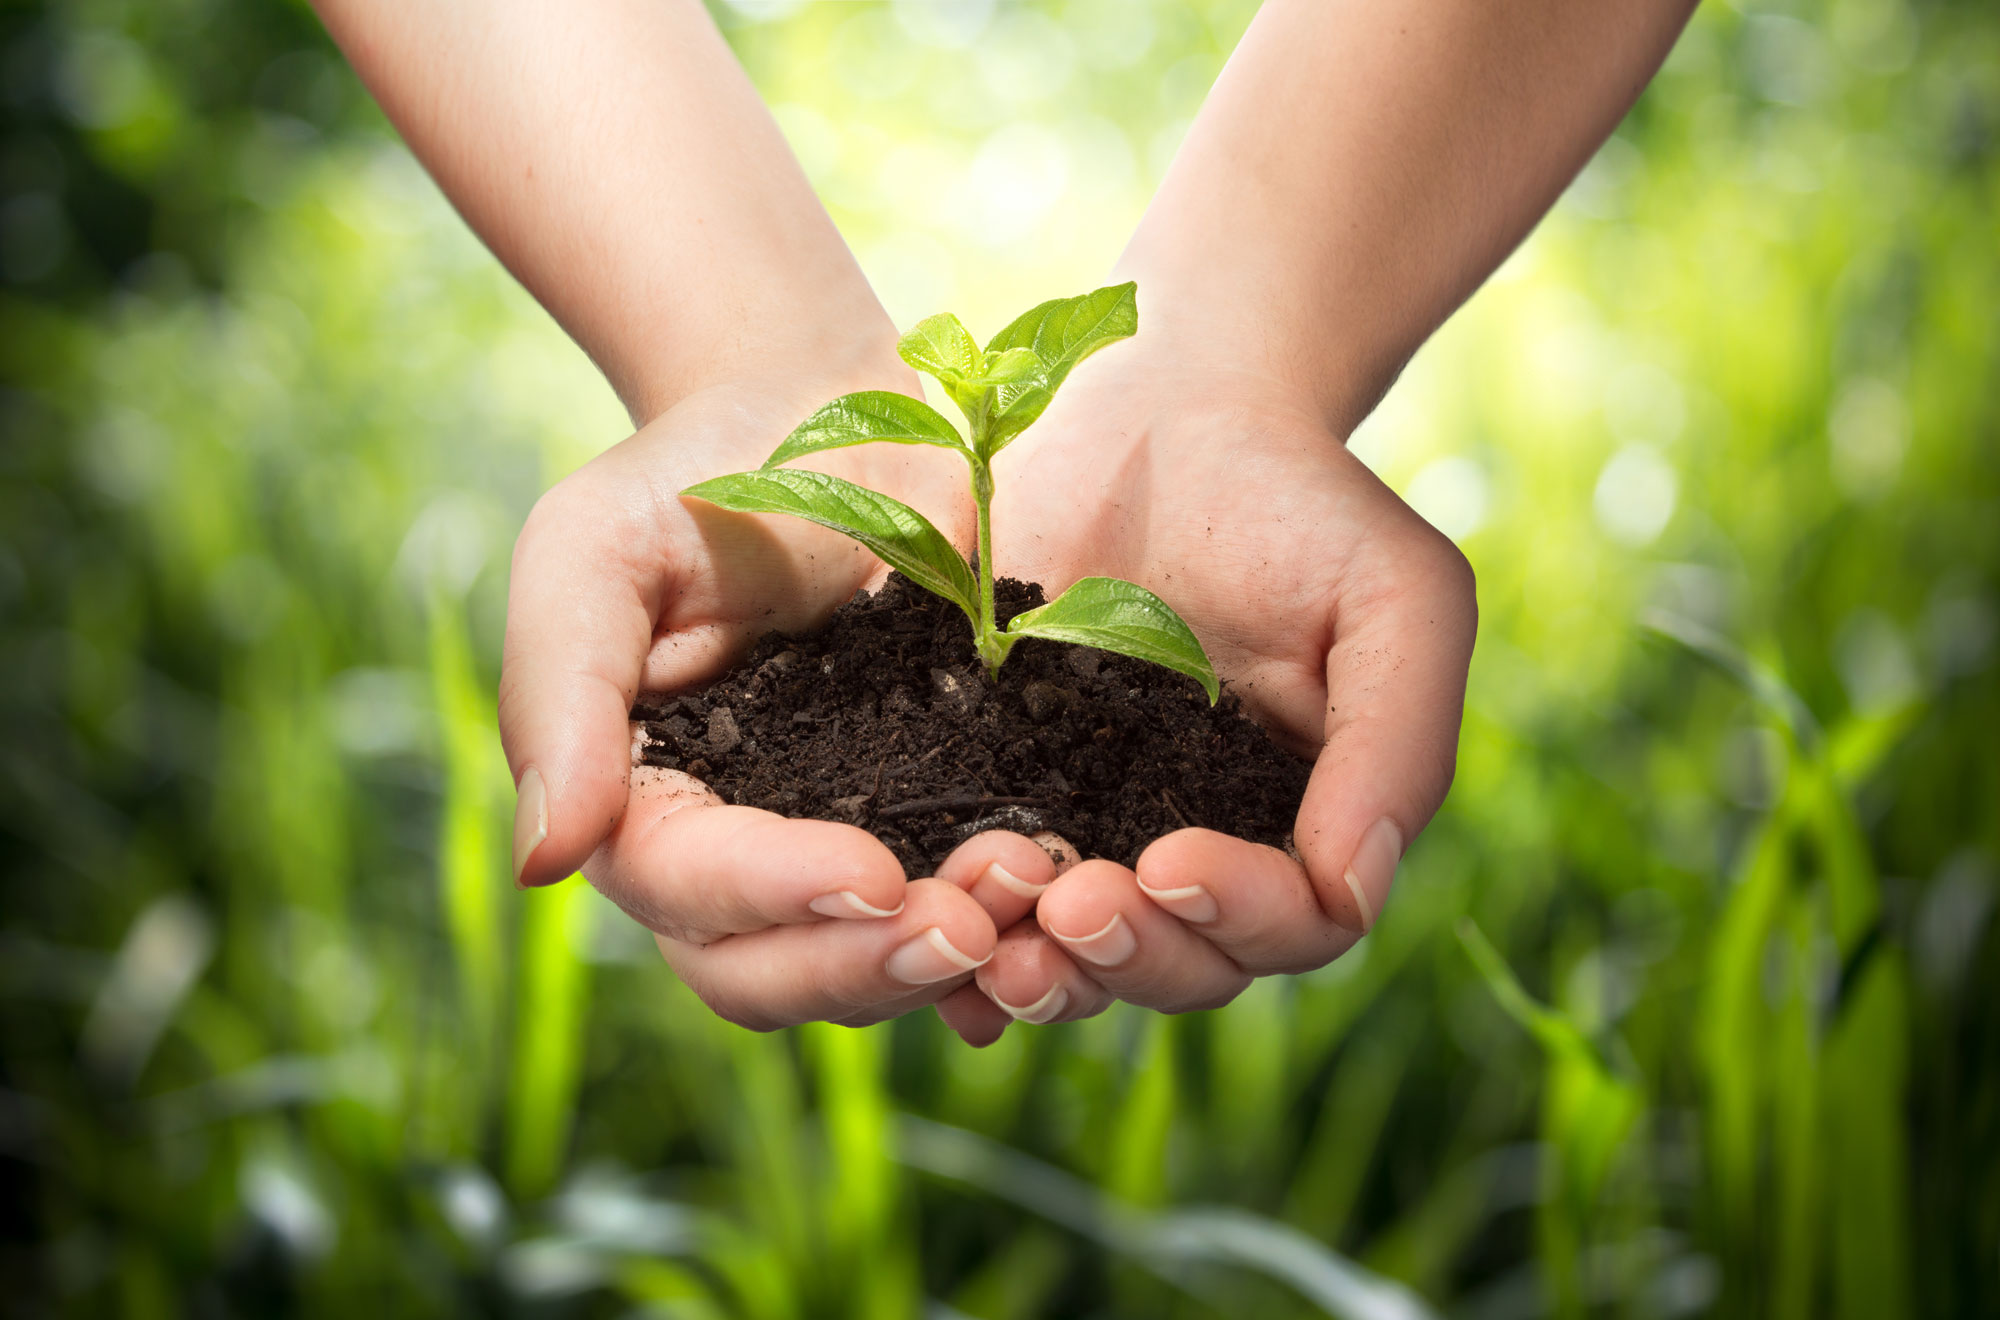 Hands holding soil with a plant